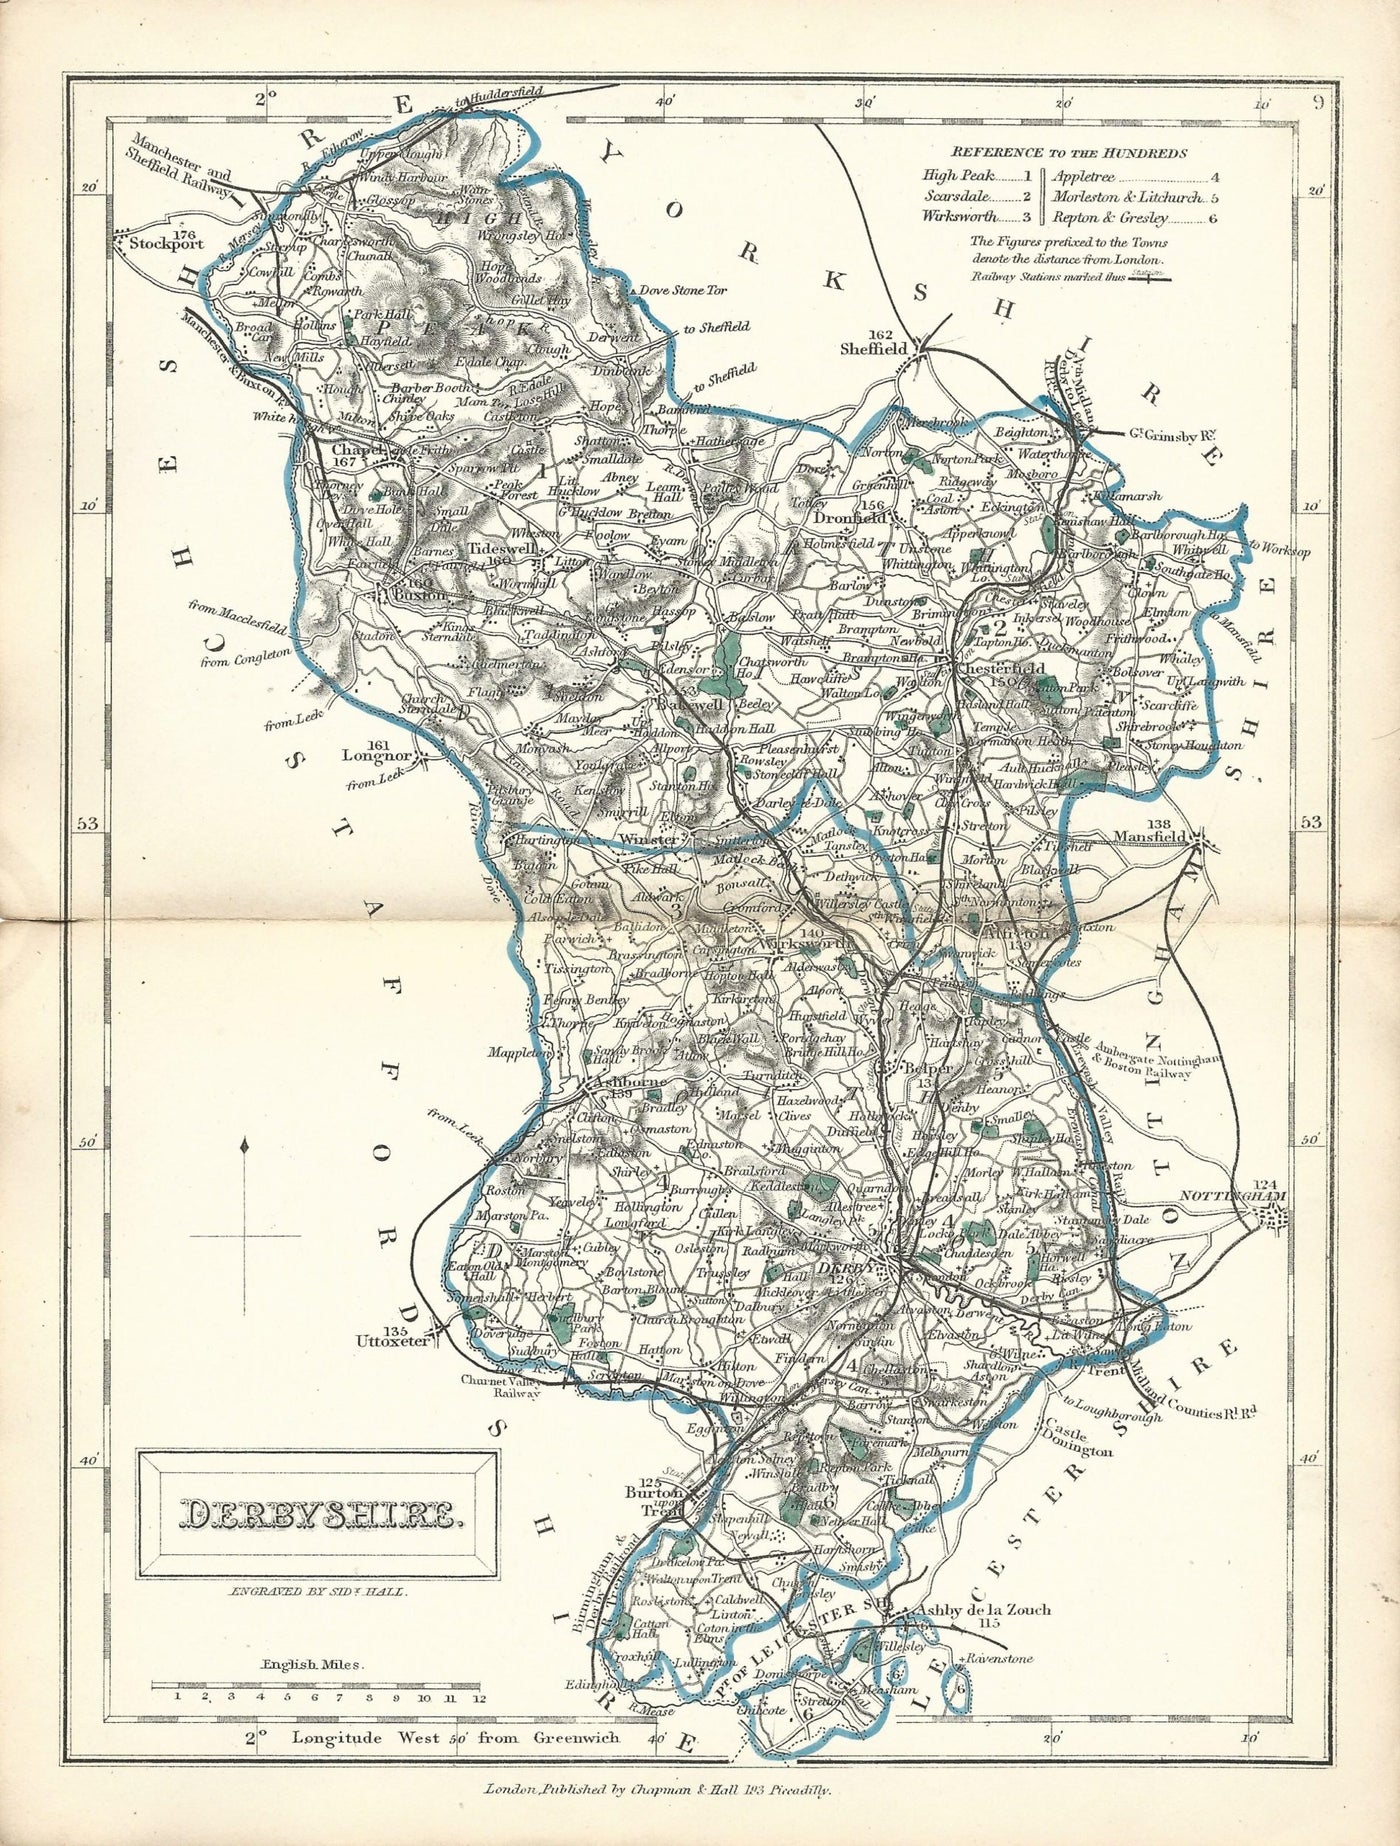 Derbyshire antique map from English Counties by Sidney Hall published 1860